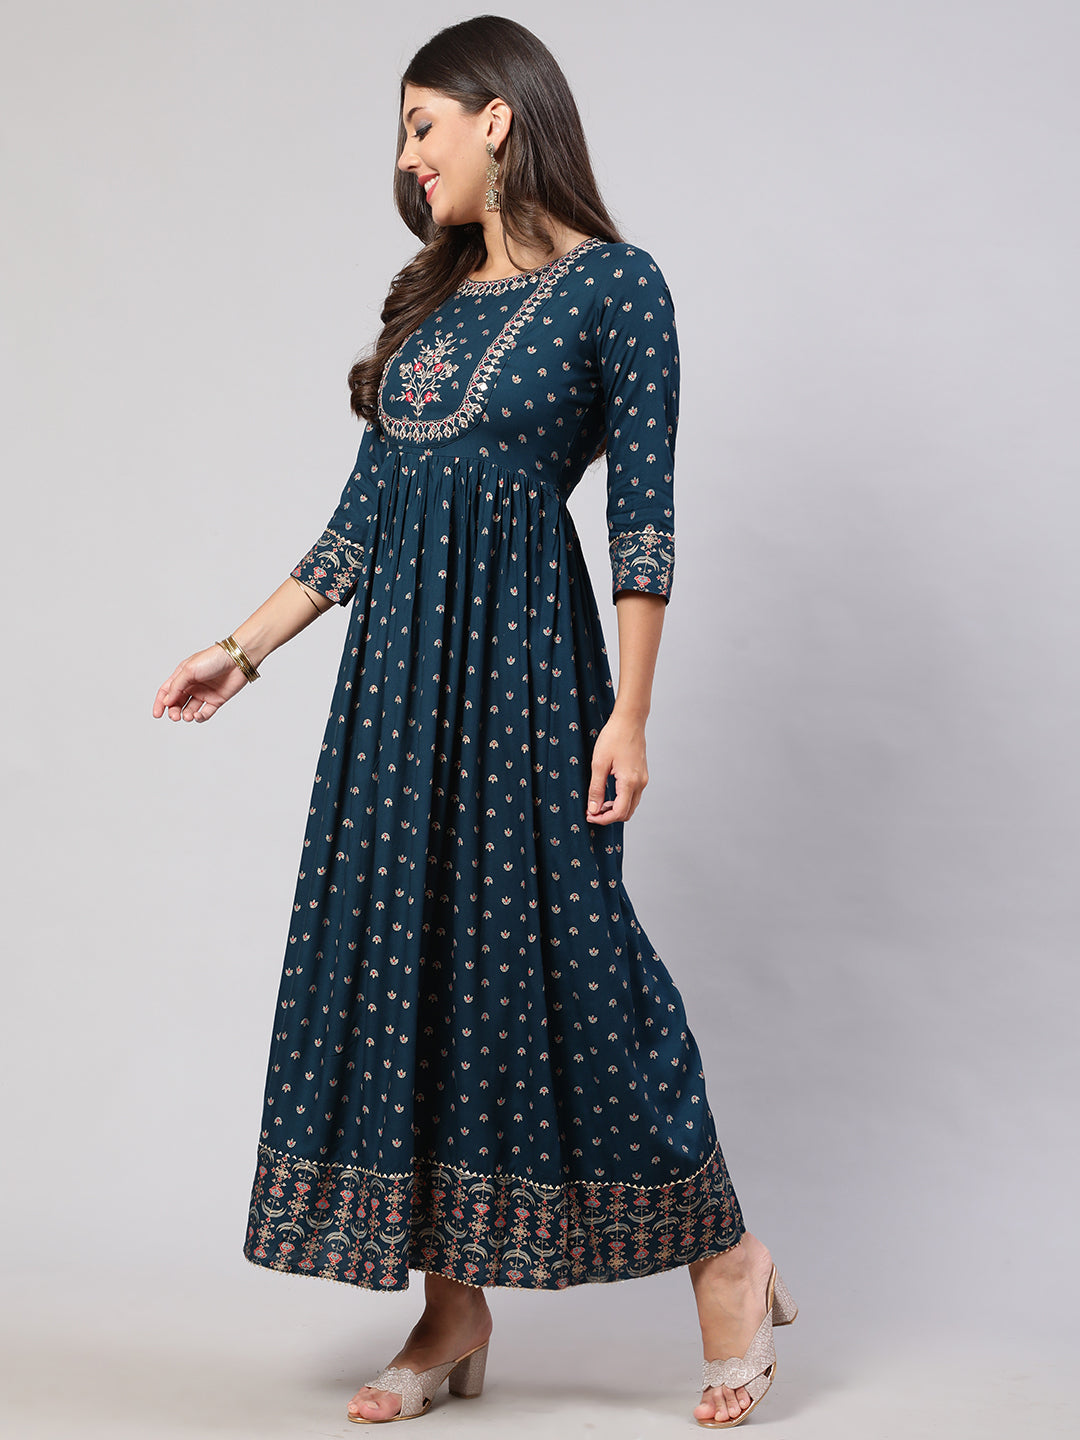 Women's Teal Floral Printed Flared Dress With Scalloped Dupatta - Nayo Clothing